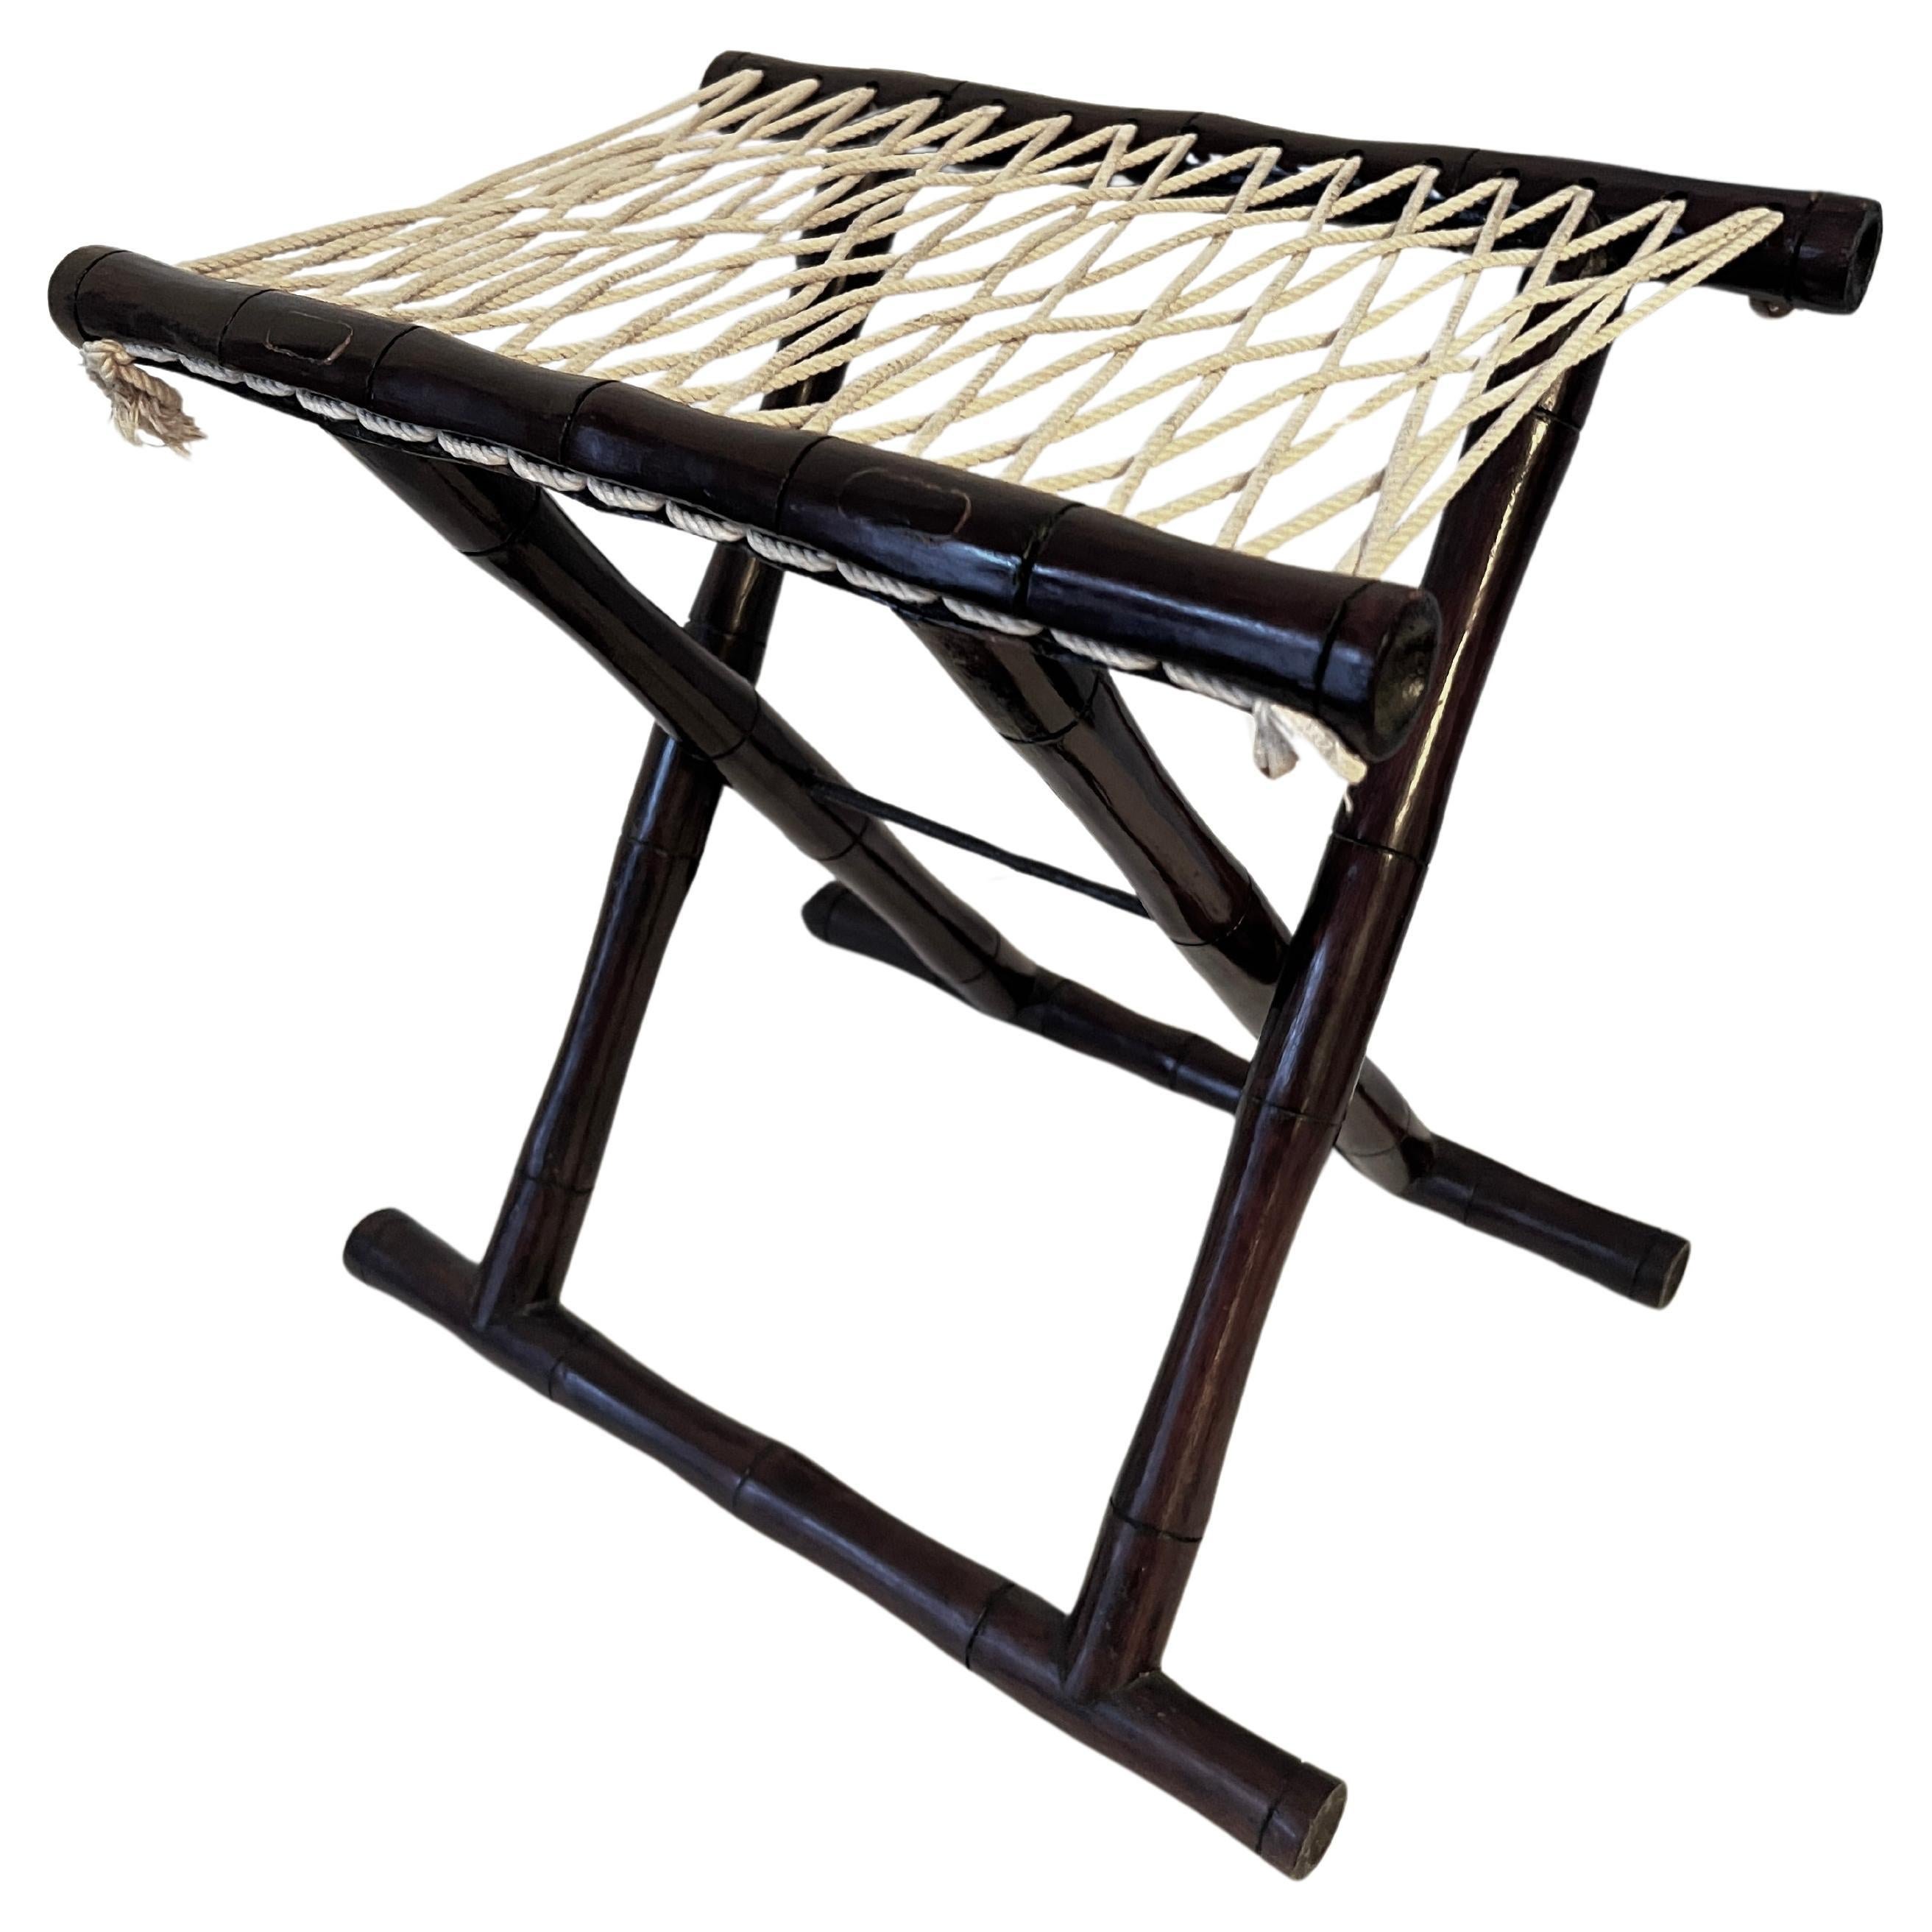  Asian Folding Fishermans Bamboo and Rope Stool  For Sale